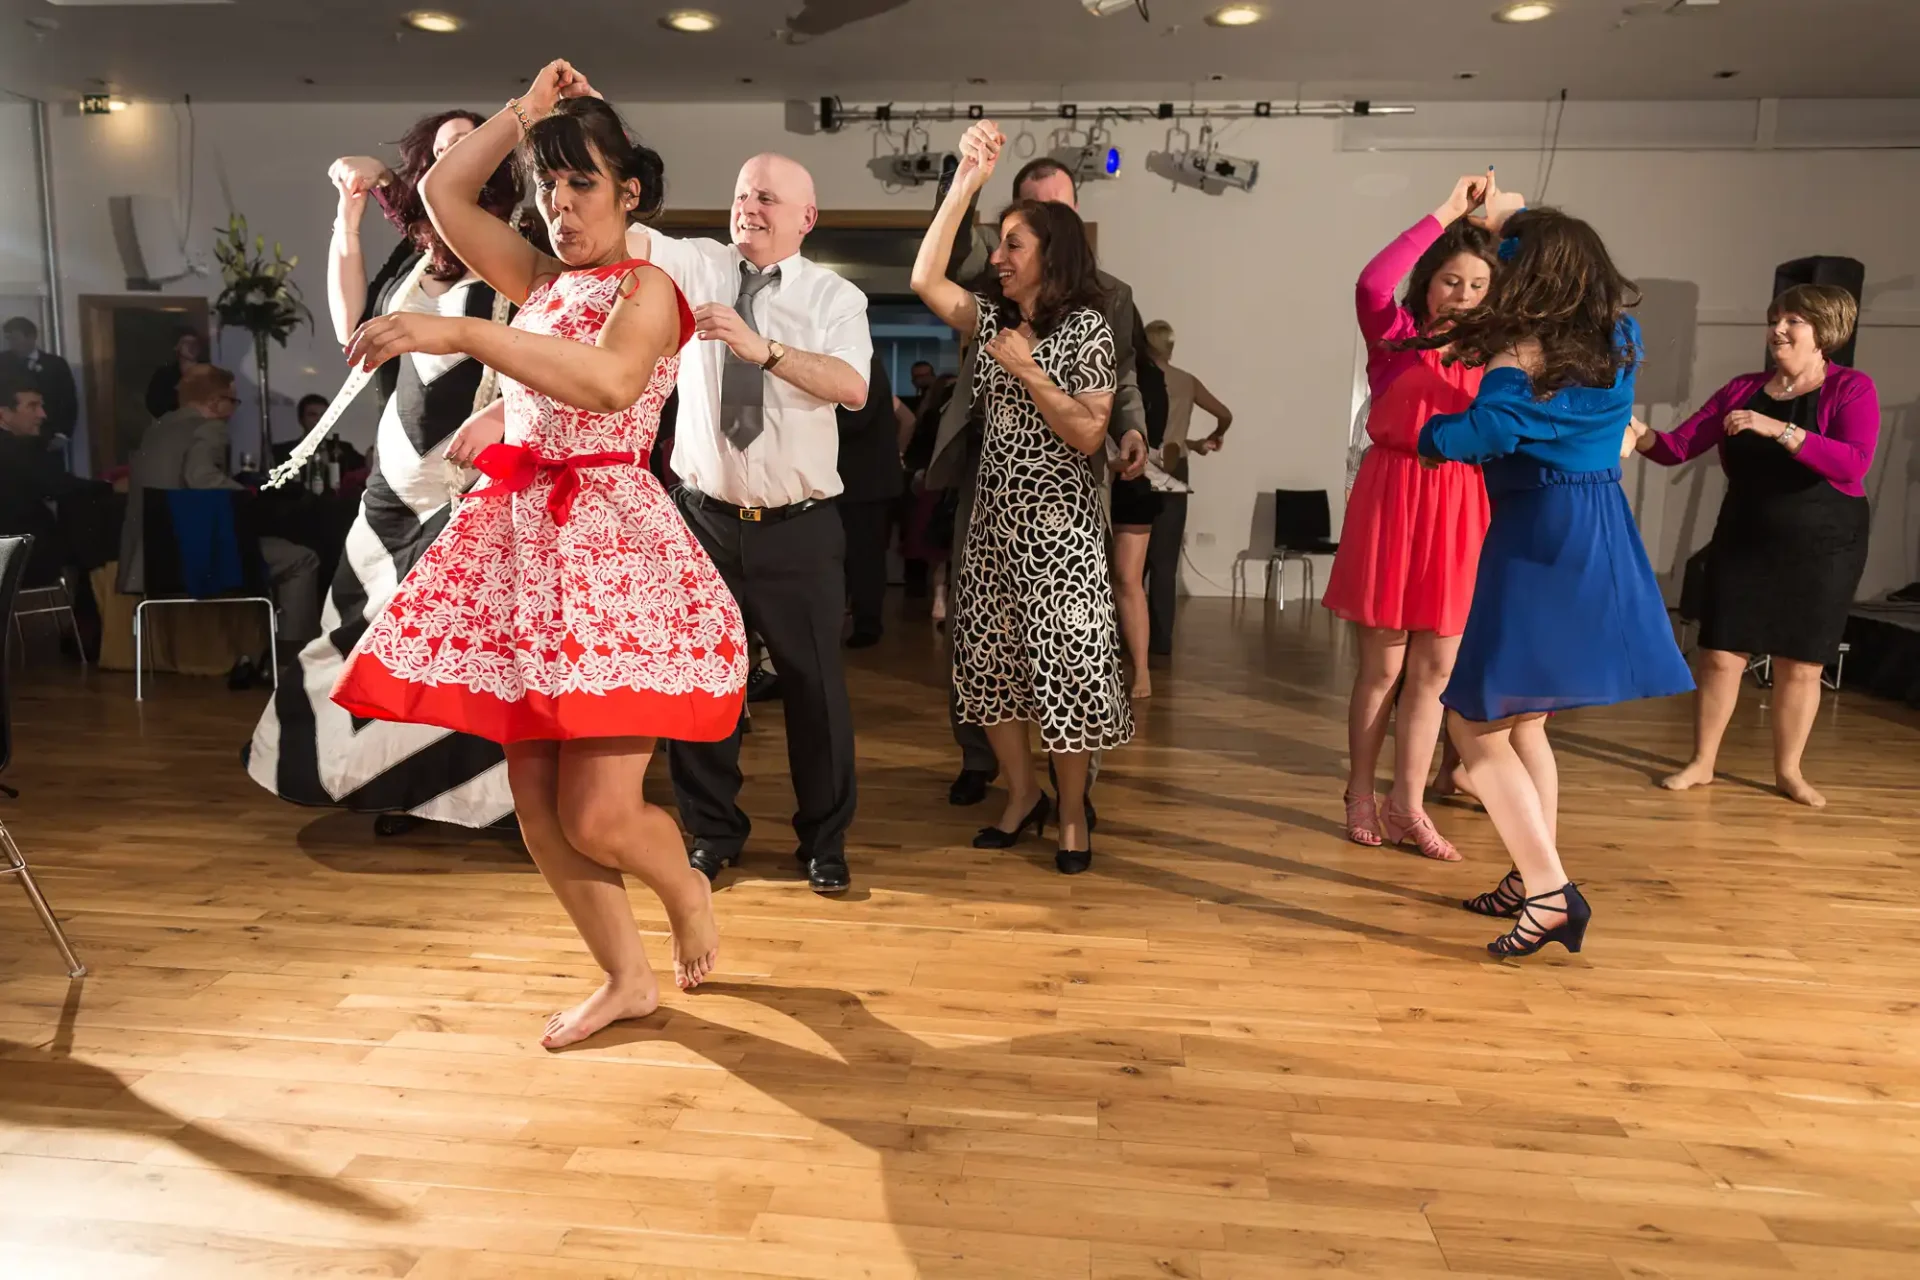 Adults dancing together at a lively event, with some couples performing dance moves while others enjoy in the background.